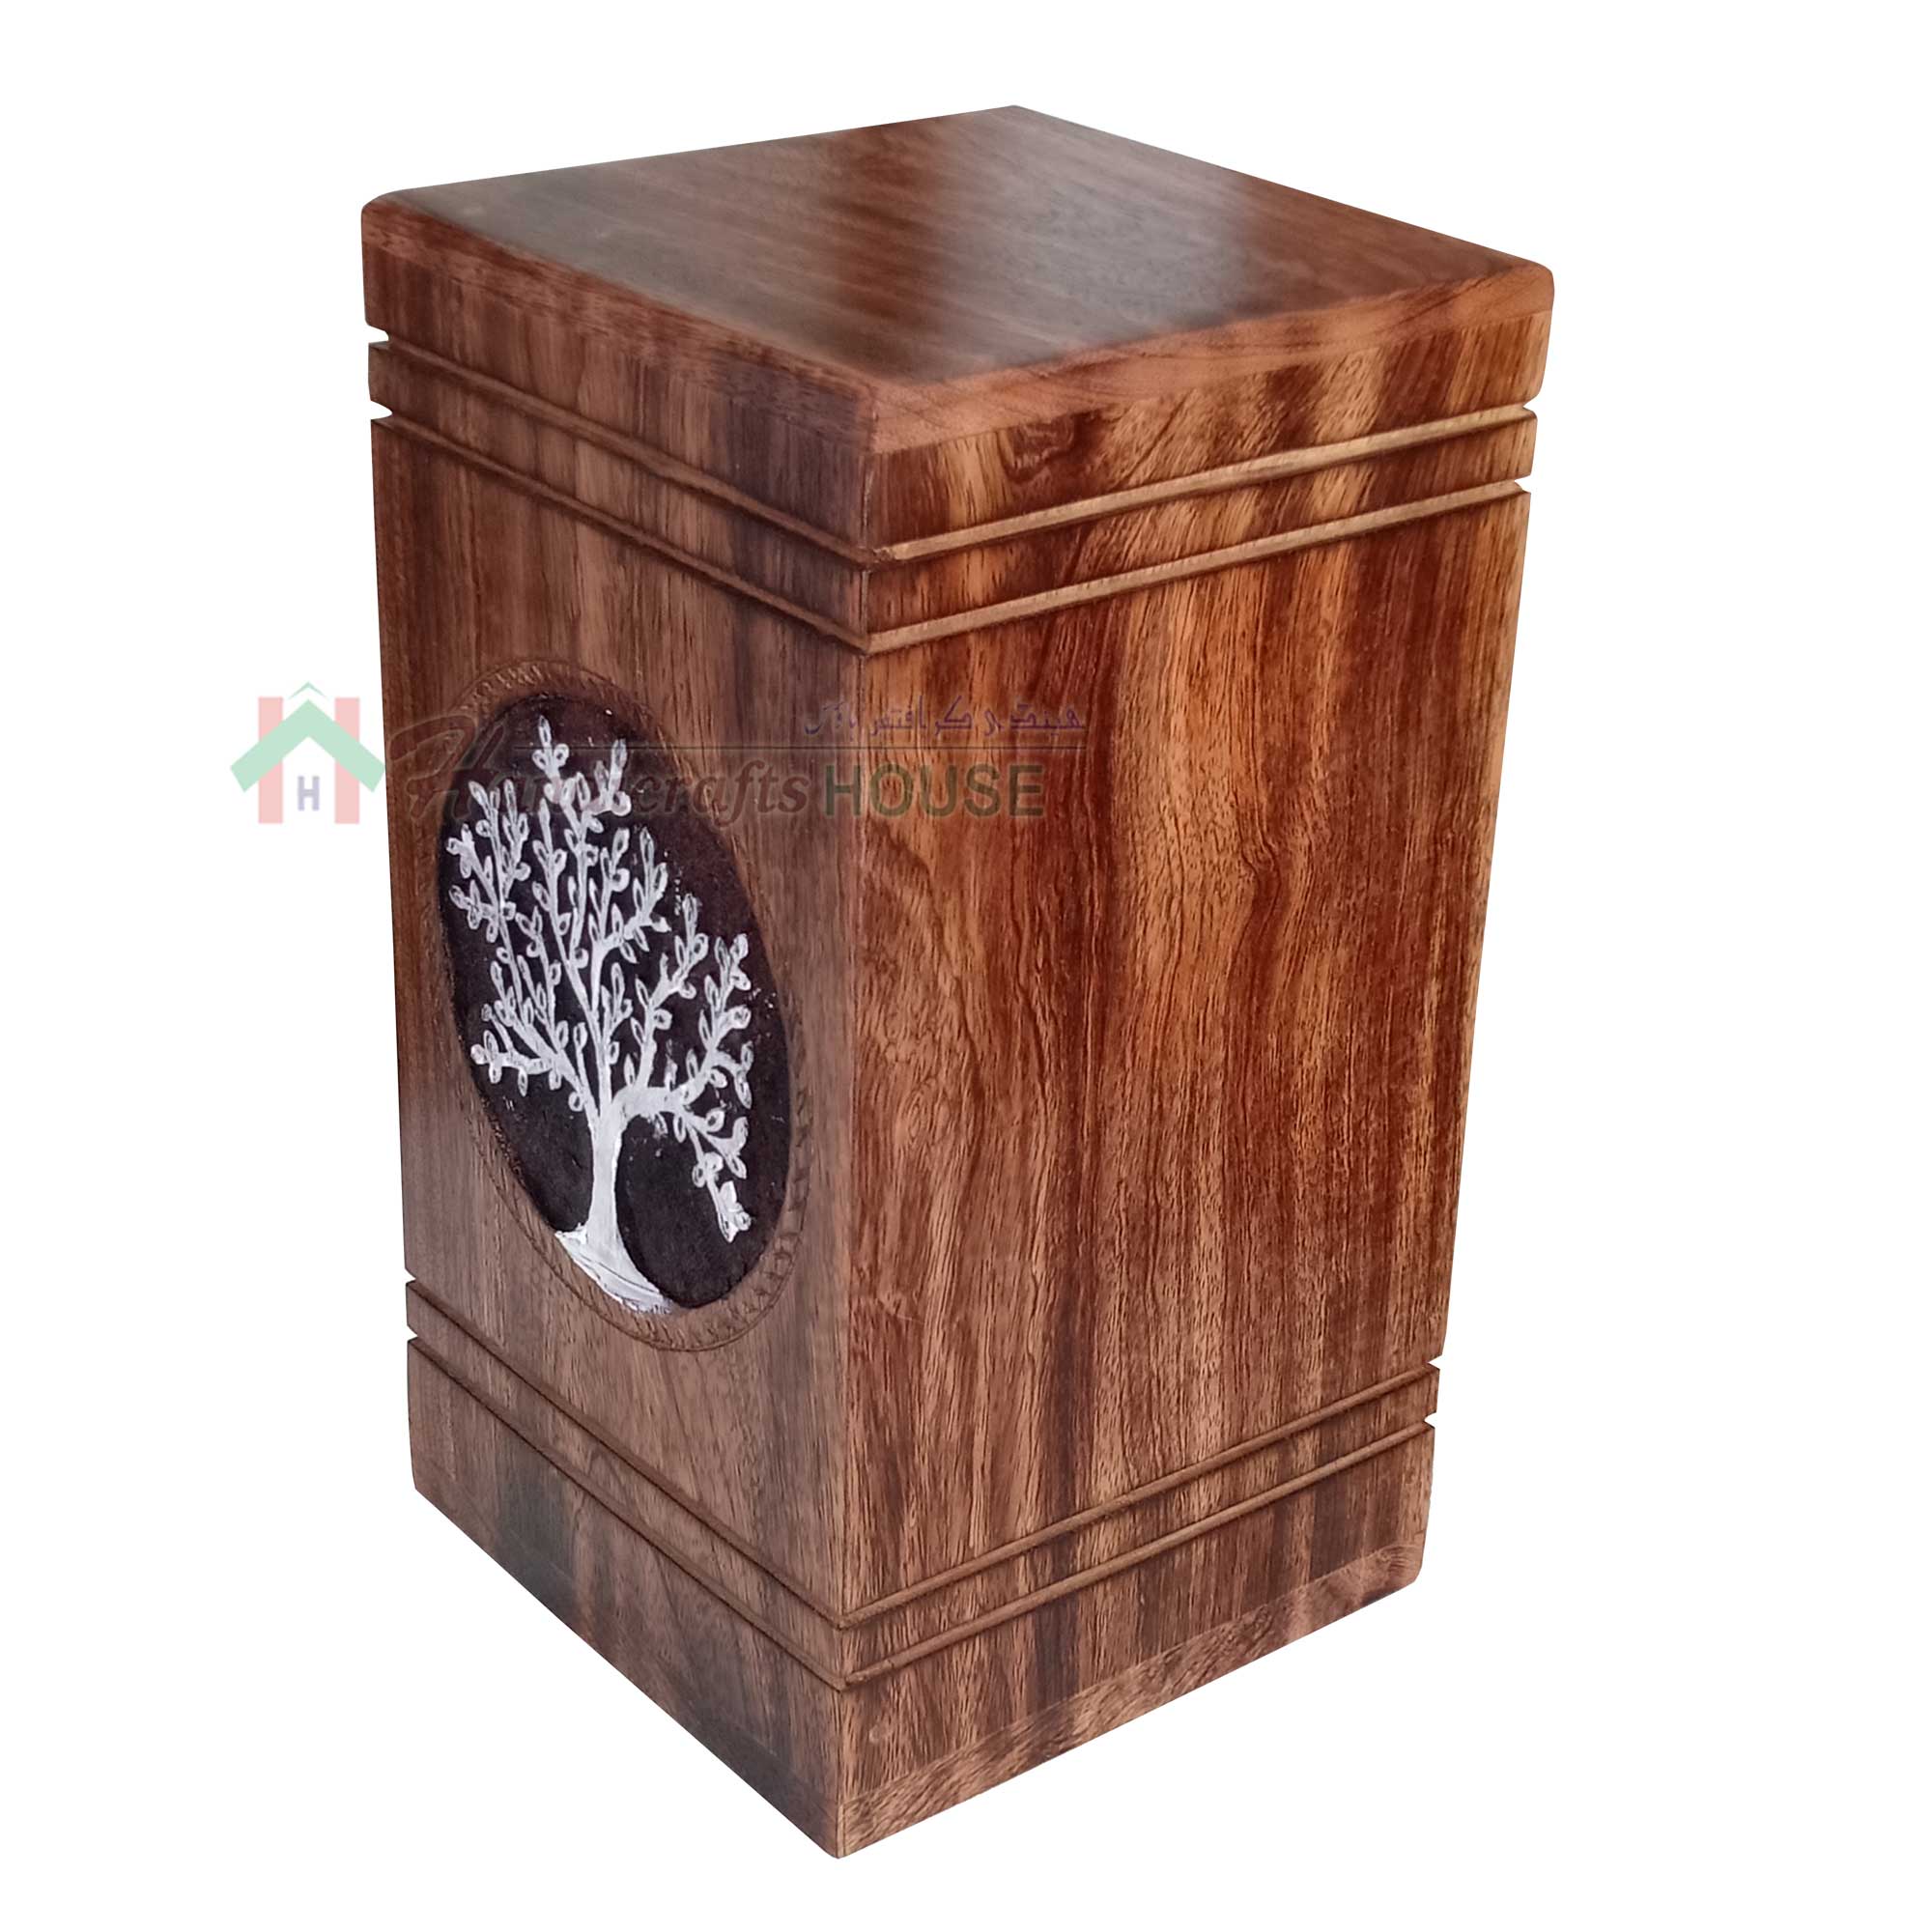 Details about   Large Wooden Cremation Urns for Human Ashes Adult Funeral Cremation Urn for Pets 